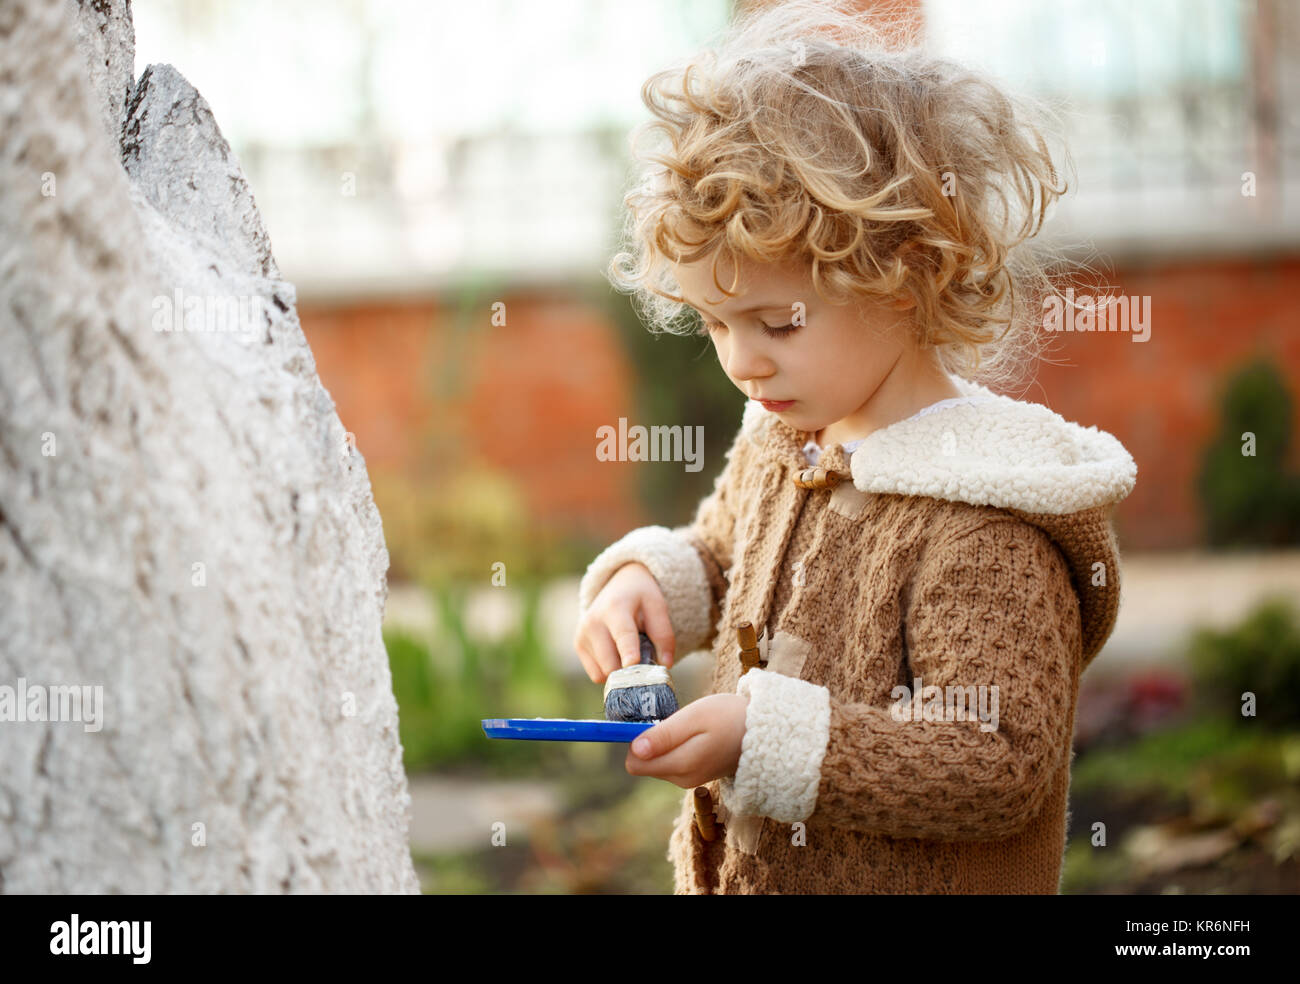 Little adorable blonde girl covering the tree with white paint to protect against rodents in the garden in the spring. Stock Photo